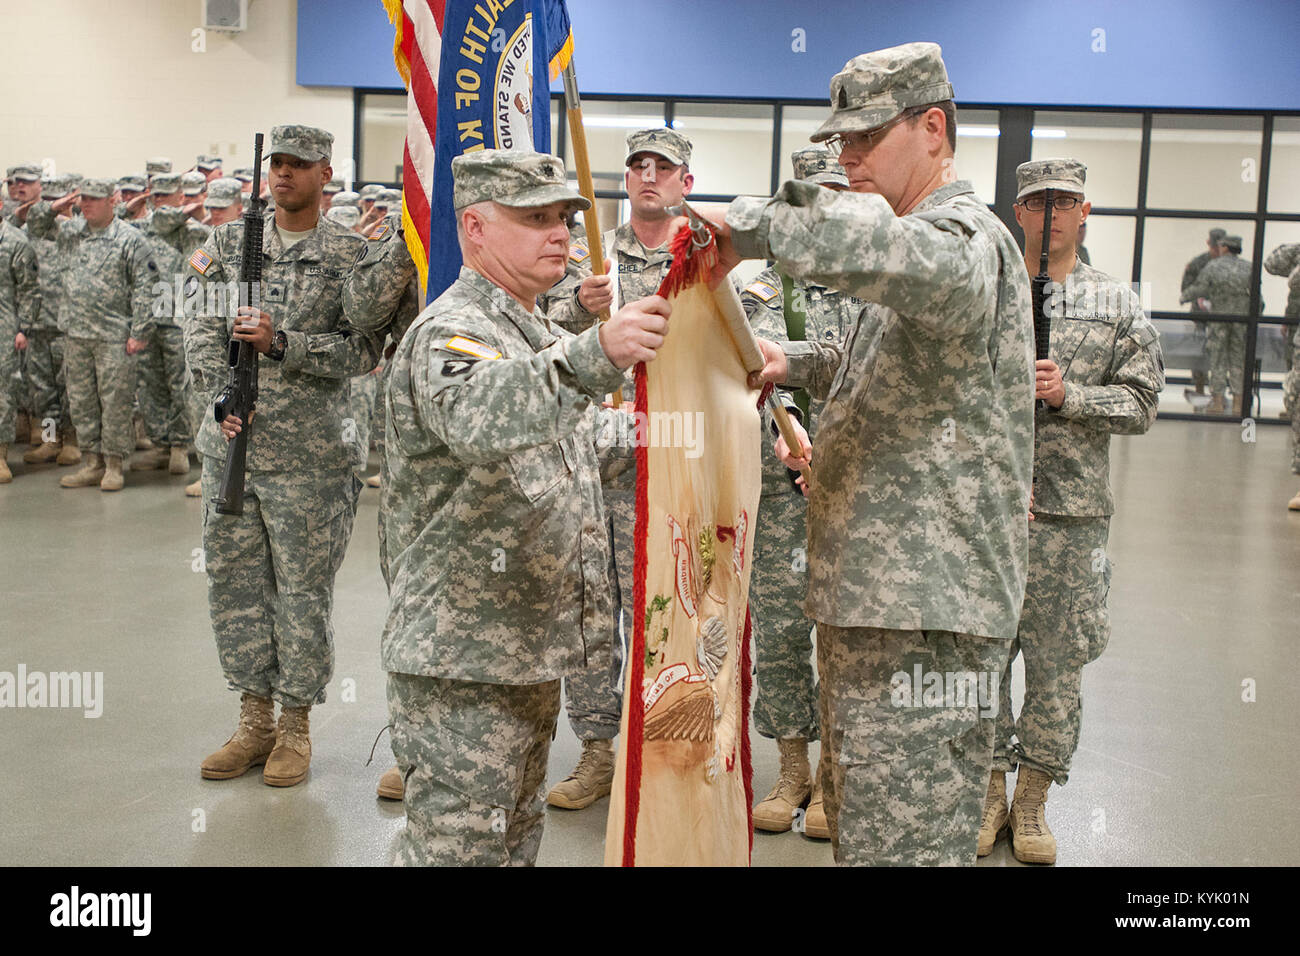 Lt. Col. Mark Brozak, commander of the 1204th Aviation Support Battalion furls the unit's colors with help from Command Sgt. Maj. Foster during an inactivation ceremony in Burlington, Ky., Jan. 10, 2016. (U.S. Army National Guard photo by Sgt. David Cox) Stock Photo